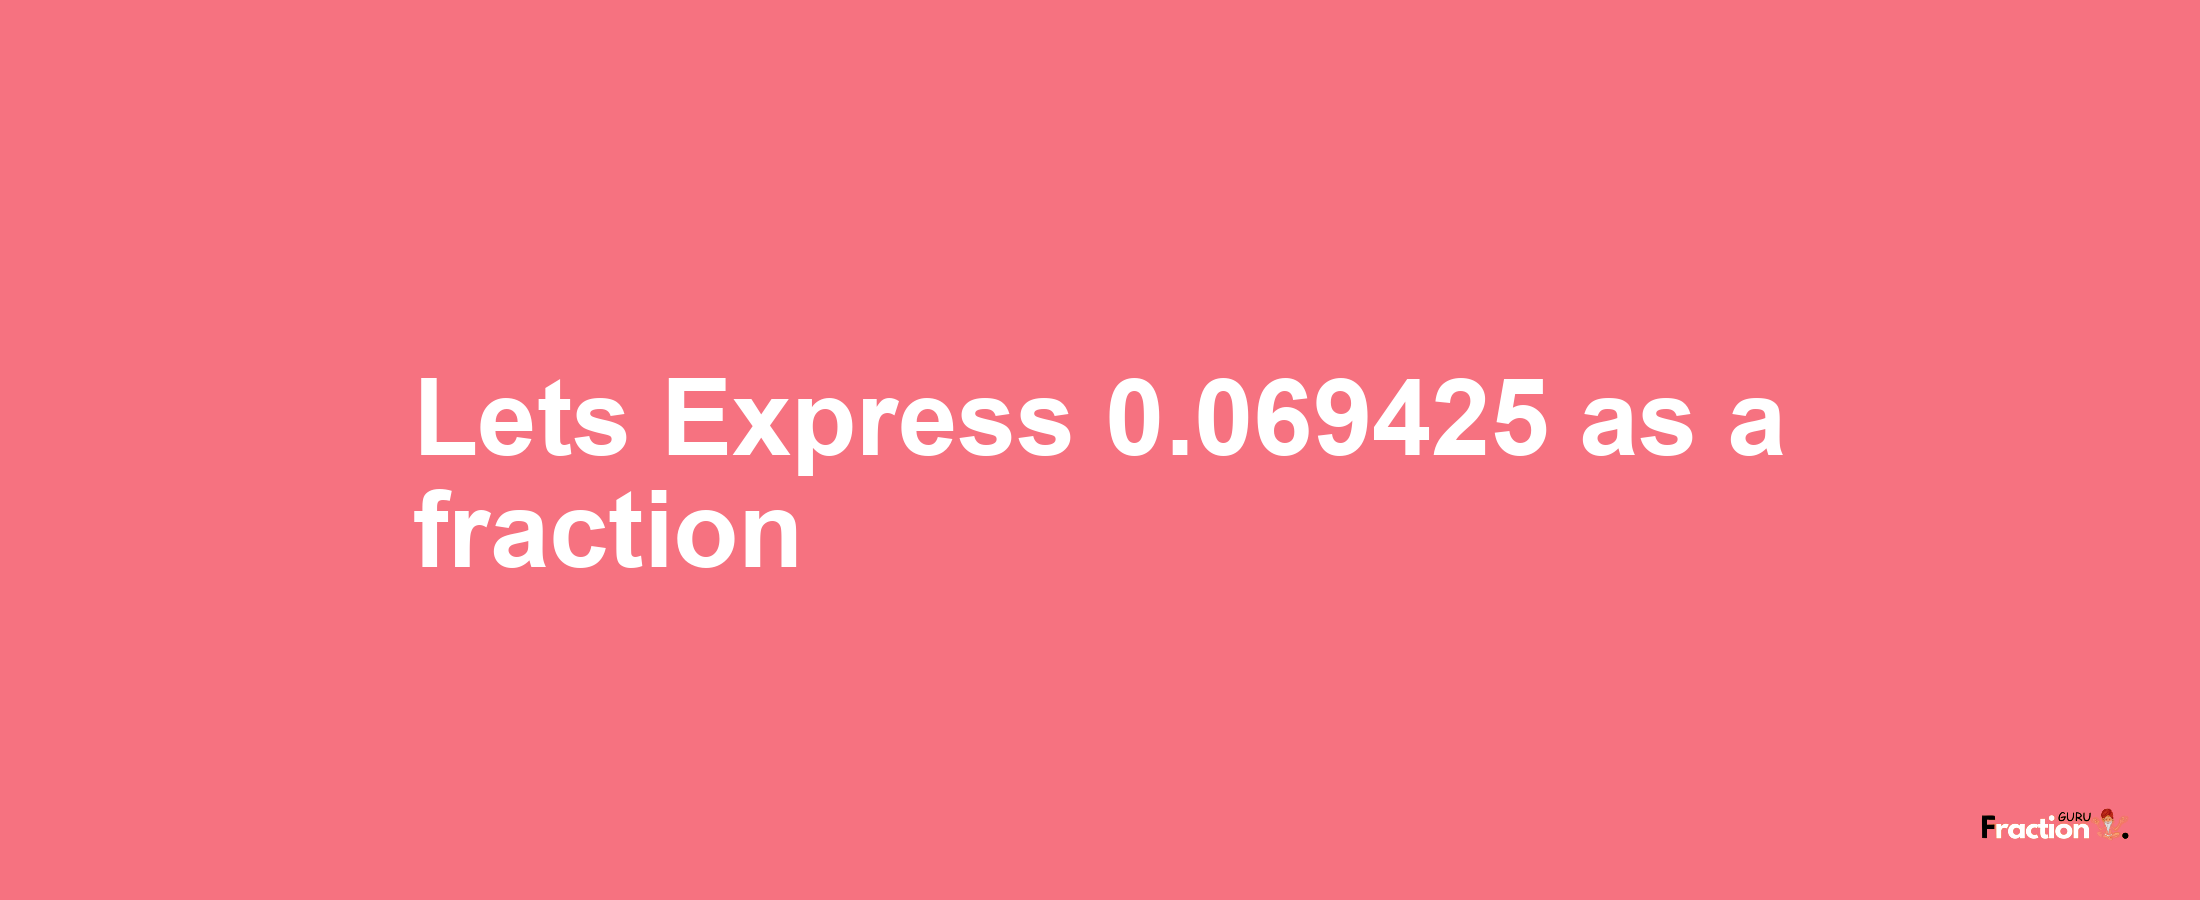 Lets Express 0.069425 as afraction